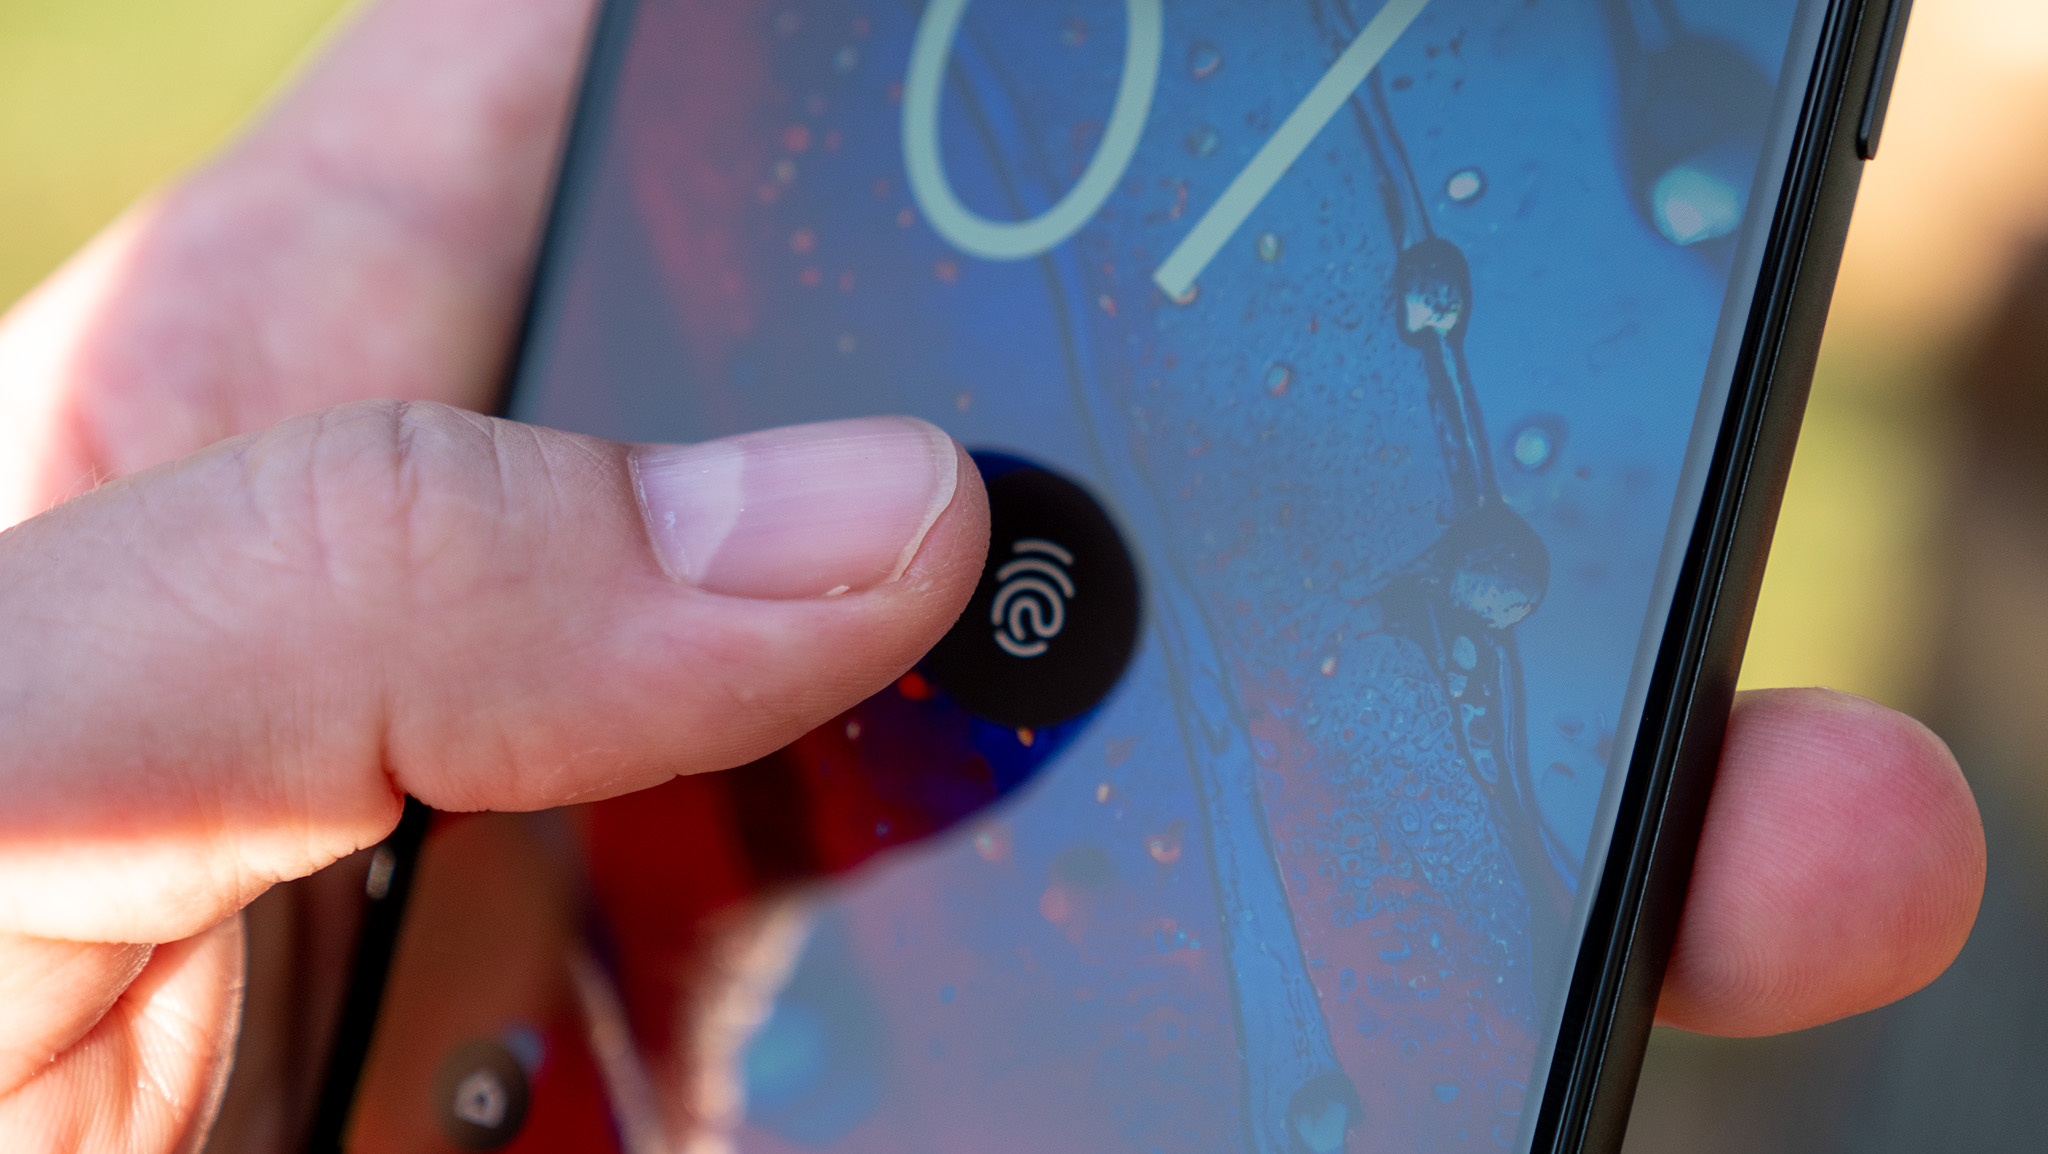 Tapping the in-display fingerprint sensor on Google Pixel 6a